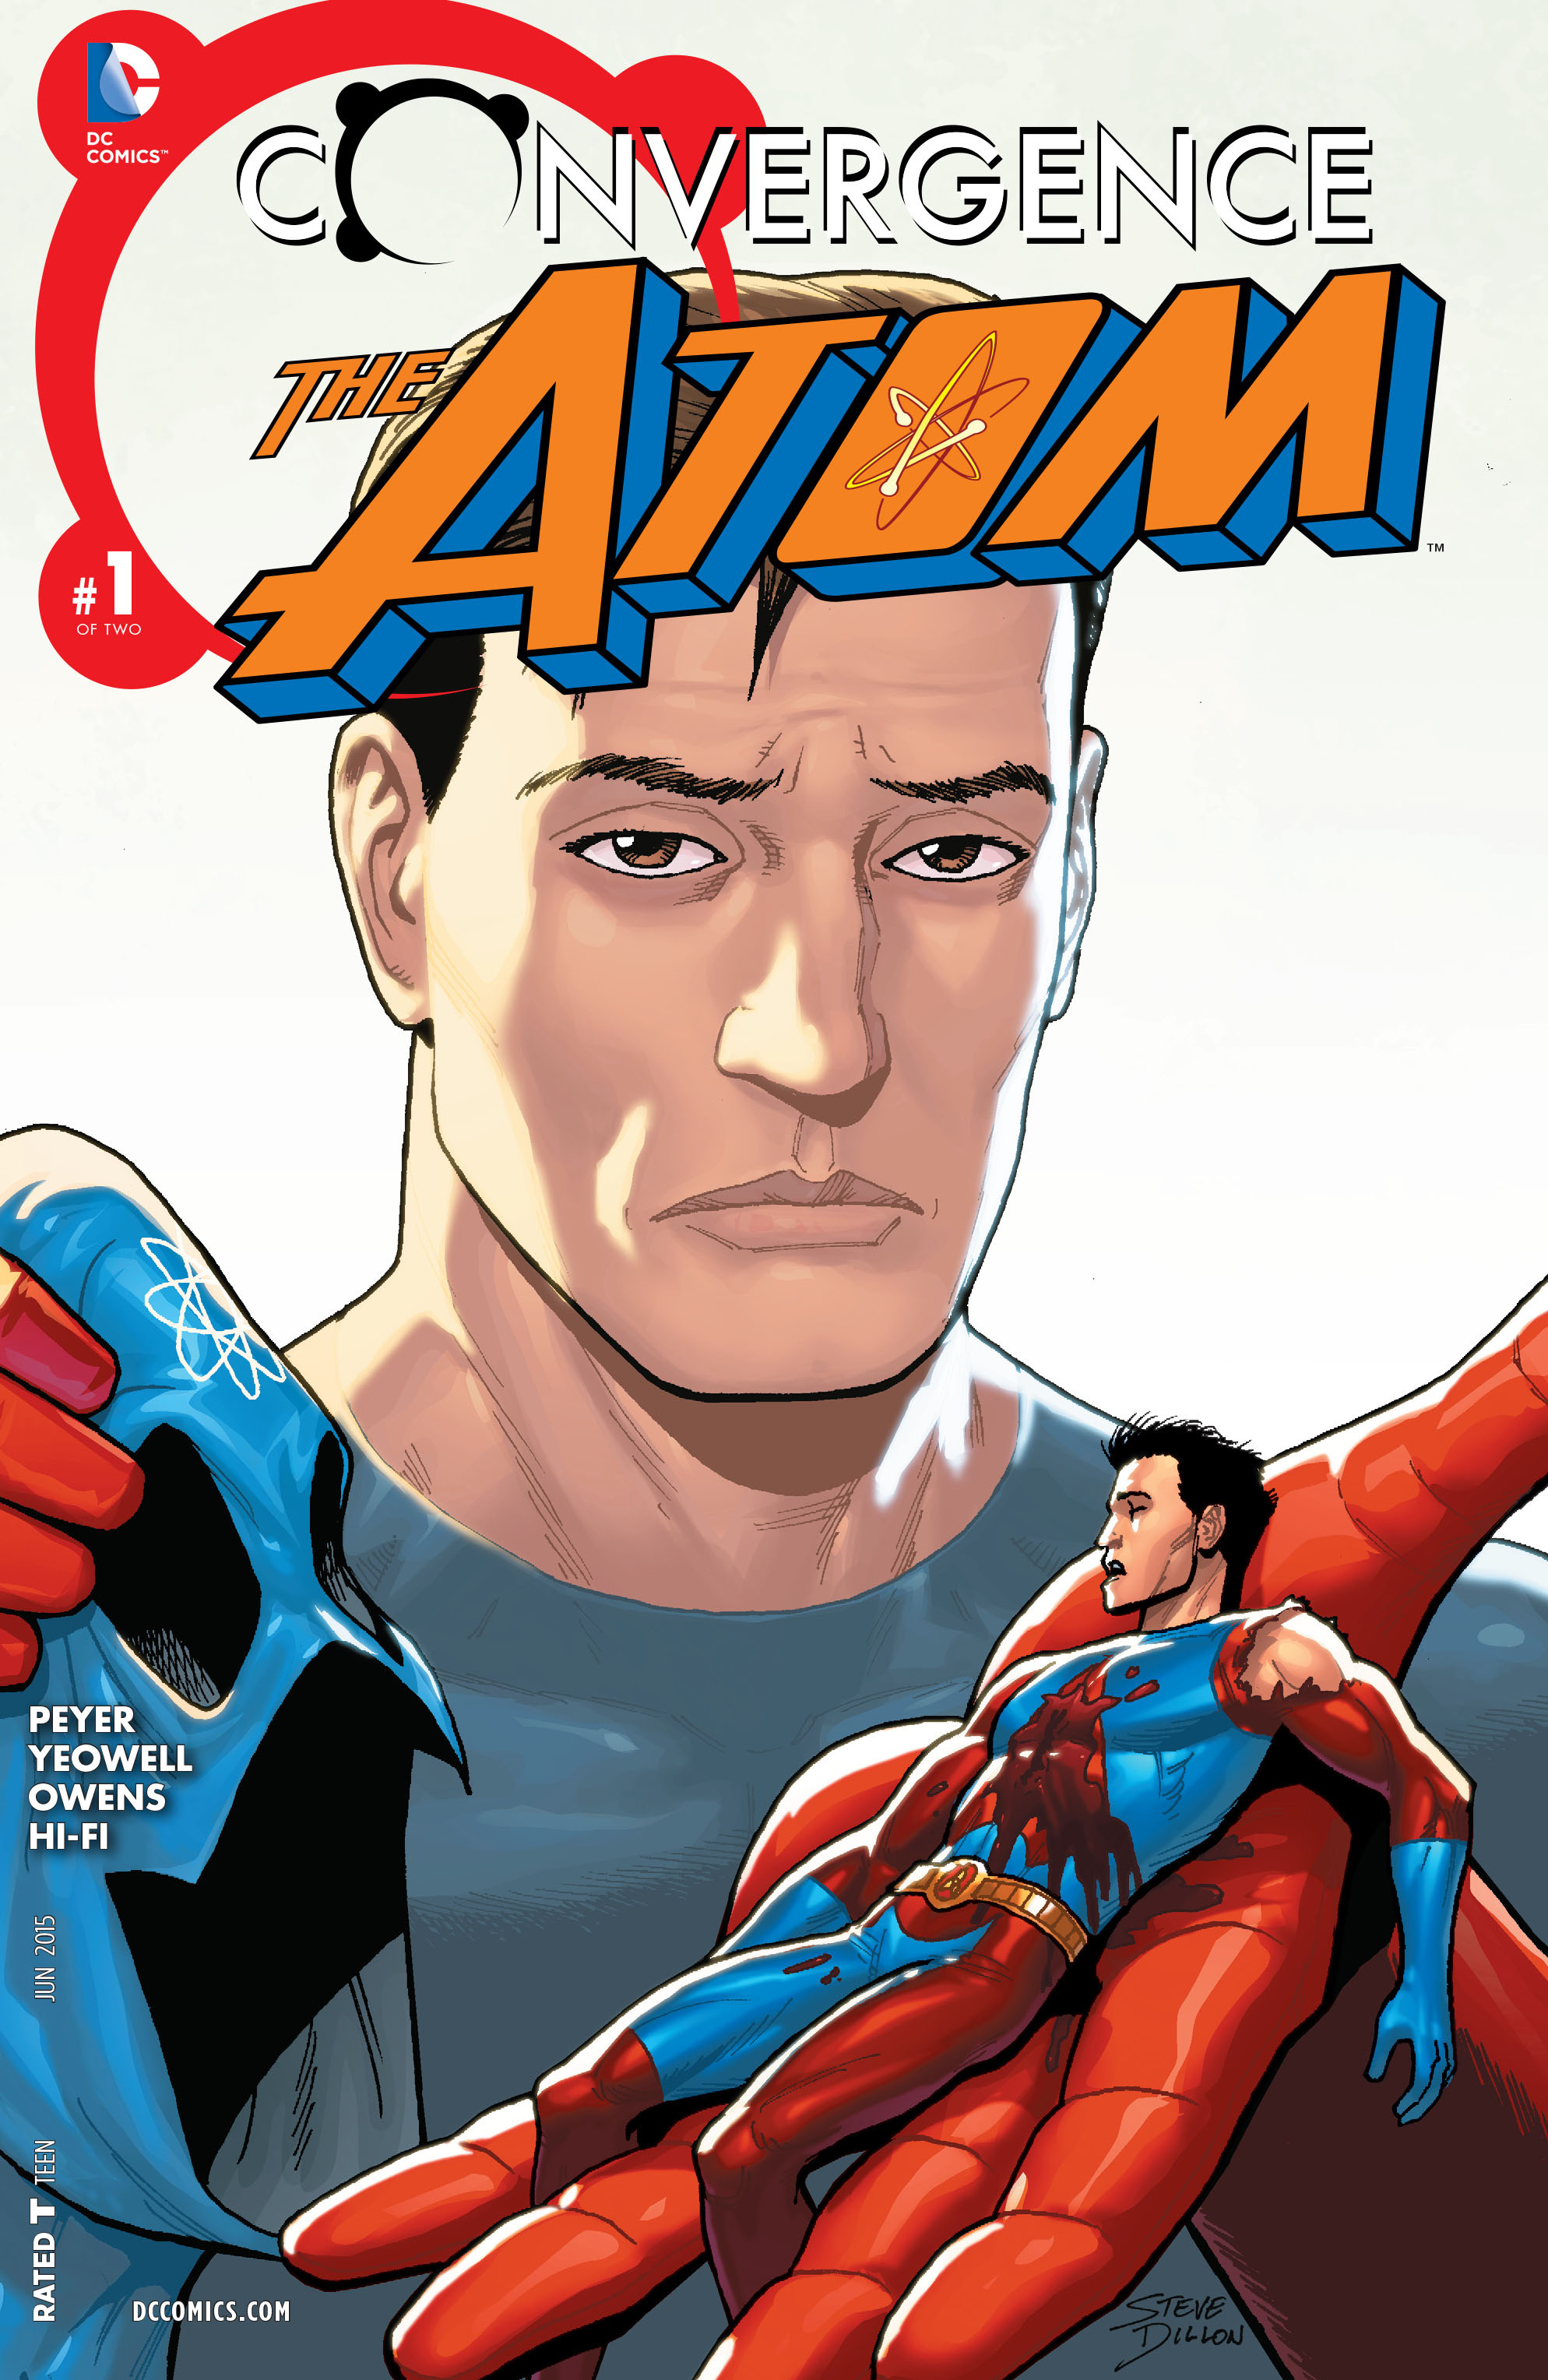 Read online Convergence Atom comic -  Issue #1 - 1